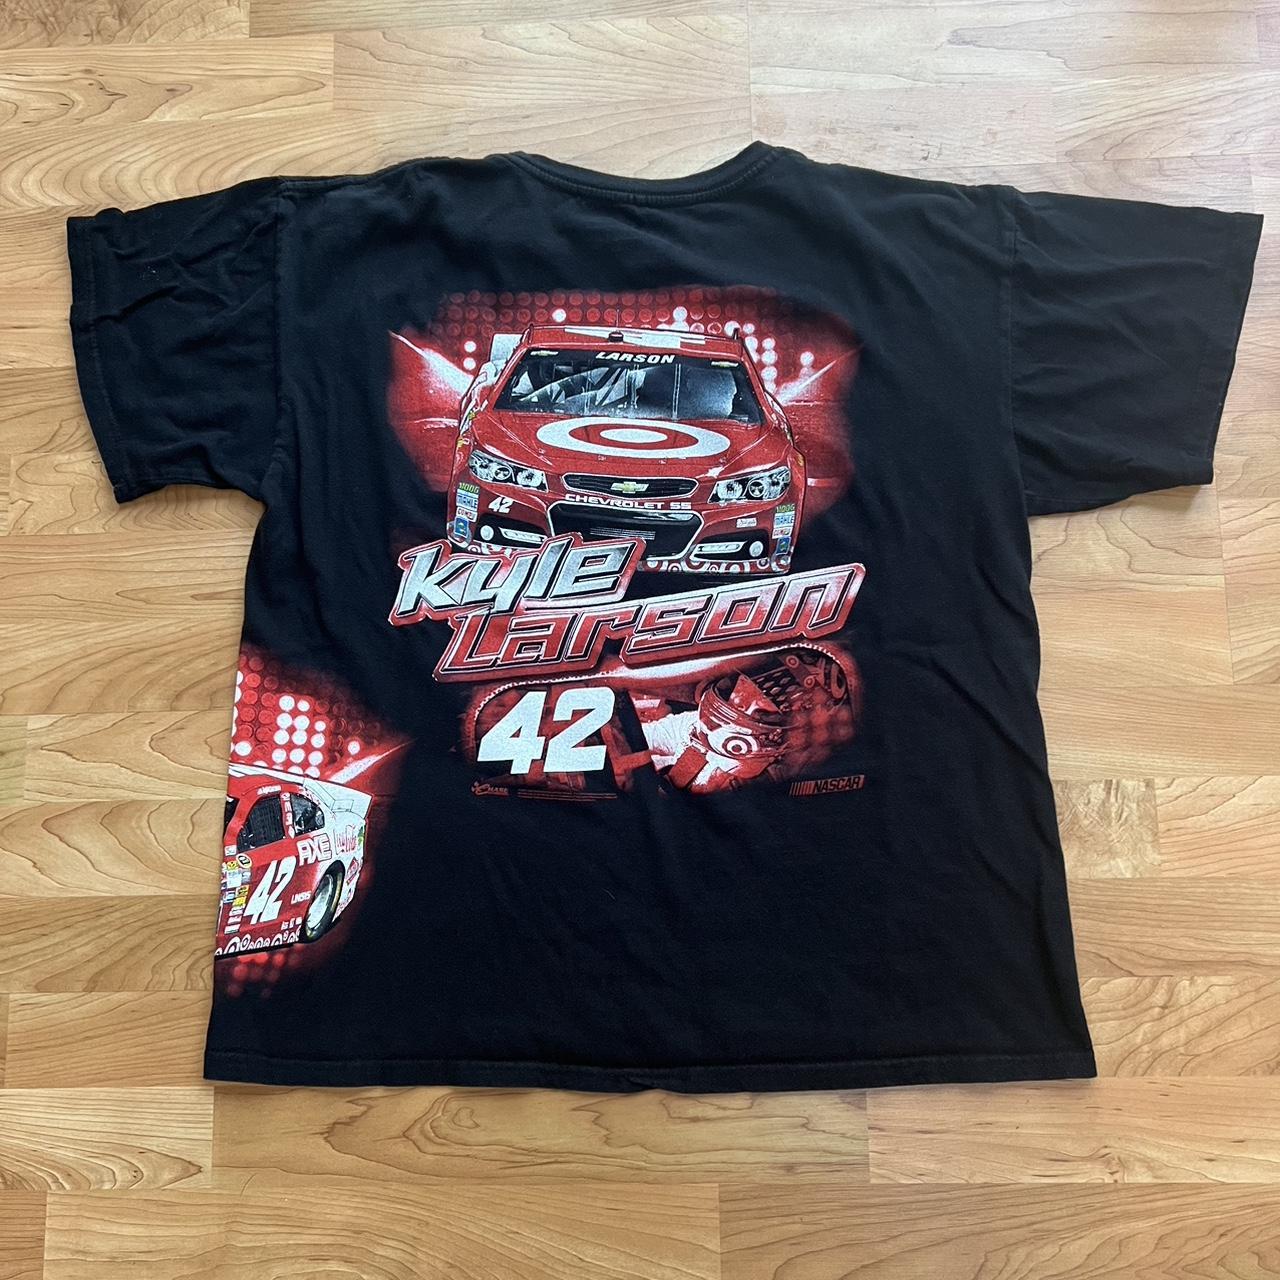 Chase Authentics Men's Black and Red T-shirt